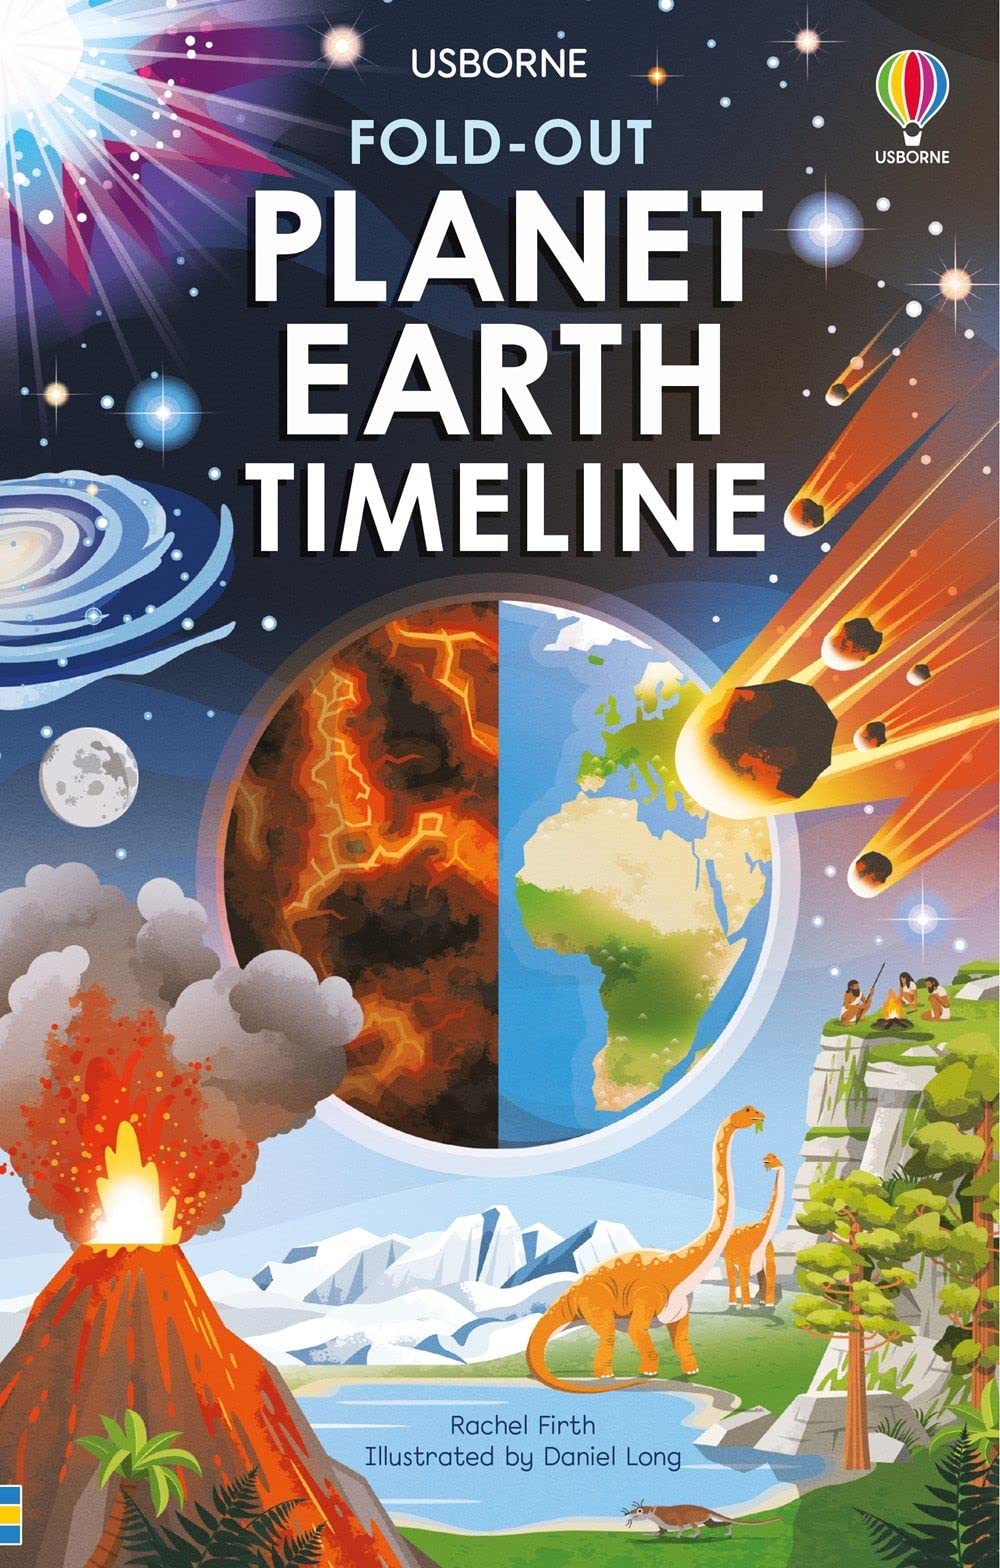 Fold-Out Planet Earth Timeline